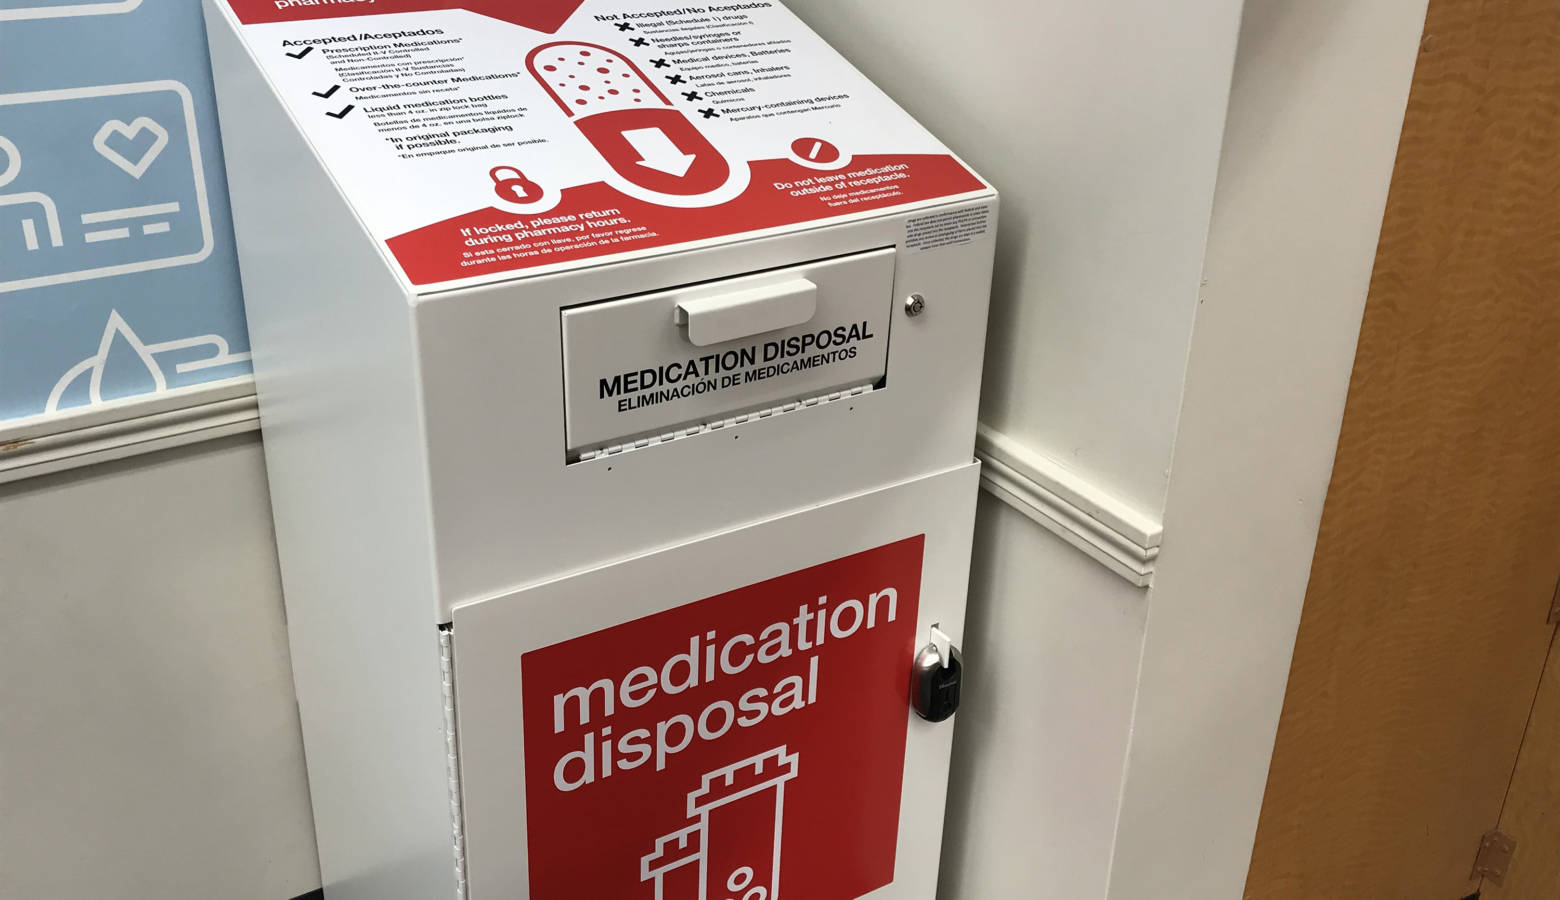 National pharmacy chain CVS announced Thursday it will install drug disposal boxes at 49 of its stores around Indiana. (Brandon Smith/IPB News)